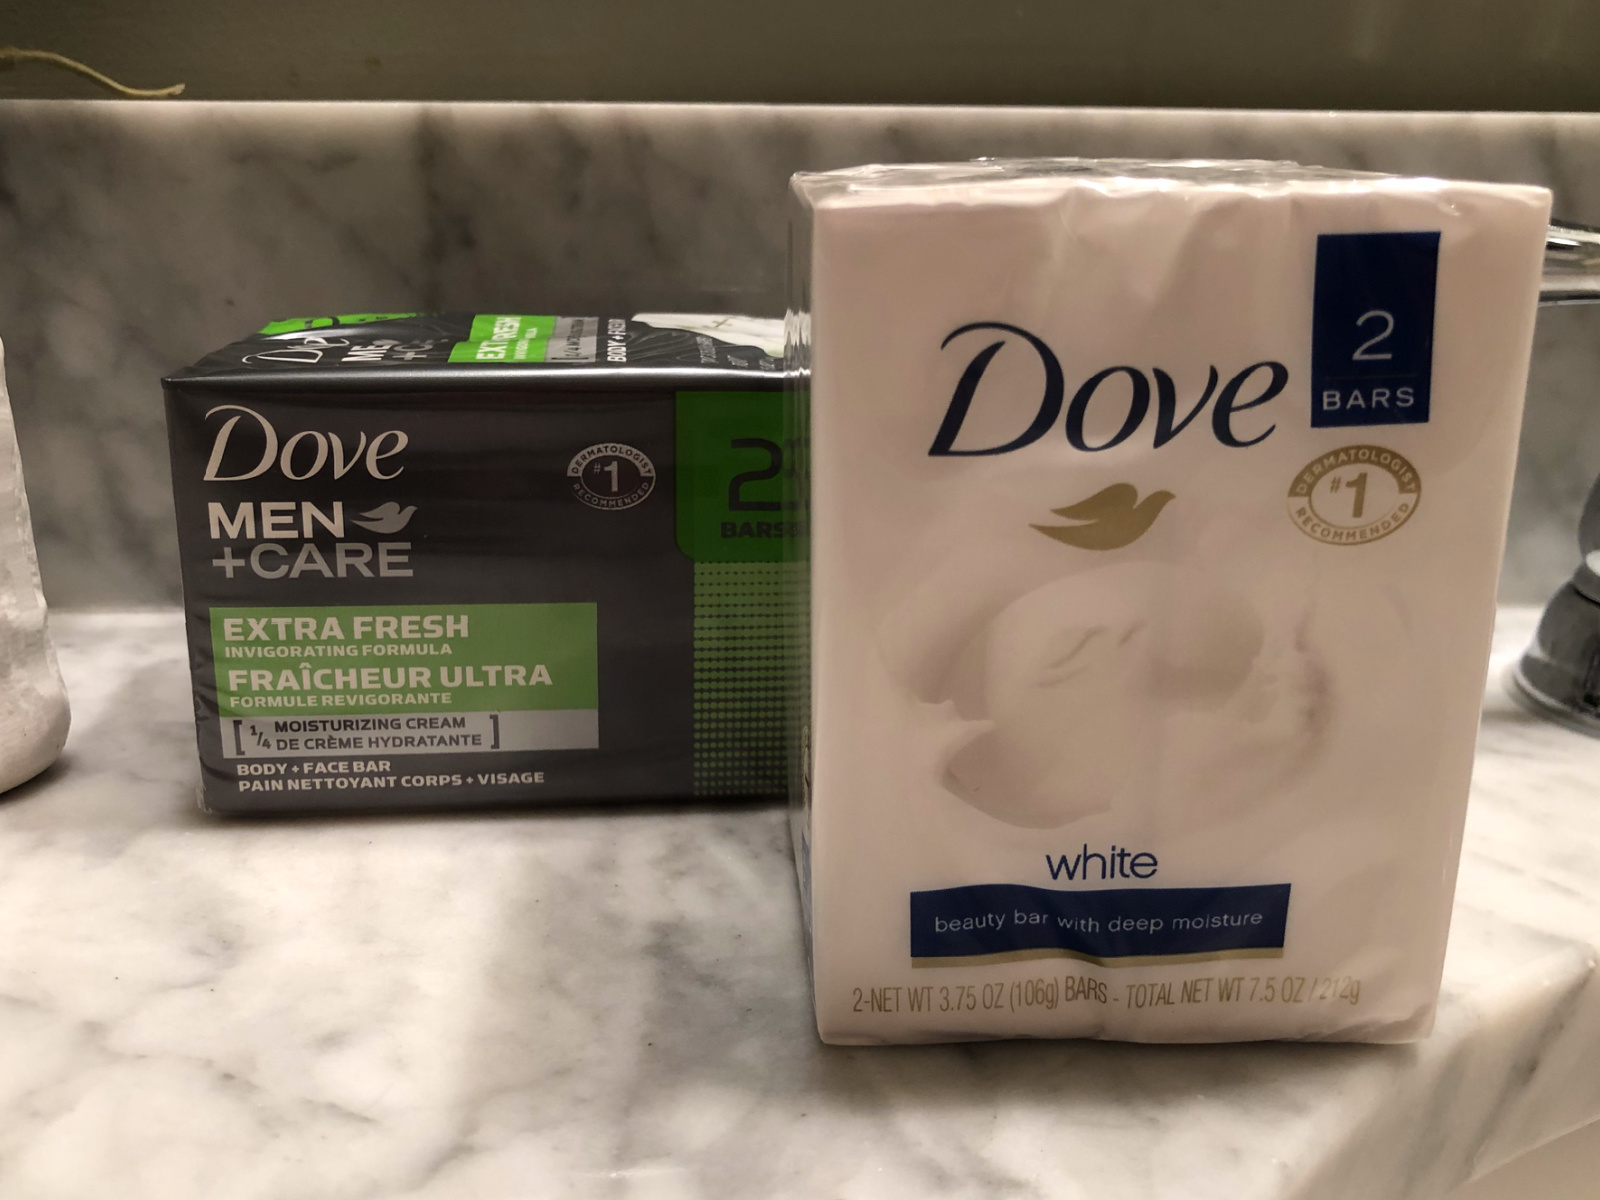 Join Dove To Build Self-Esteem & Enjoy Savings At Your Local Publix